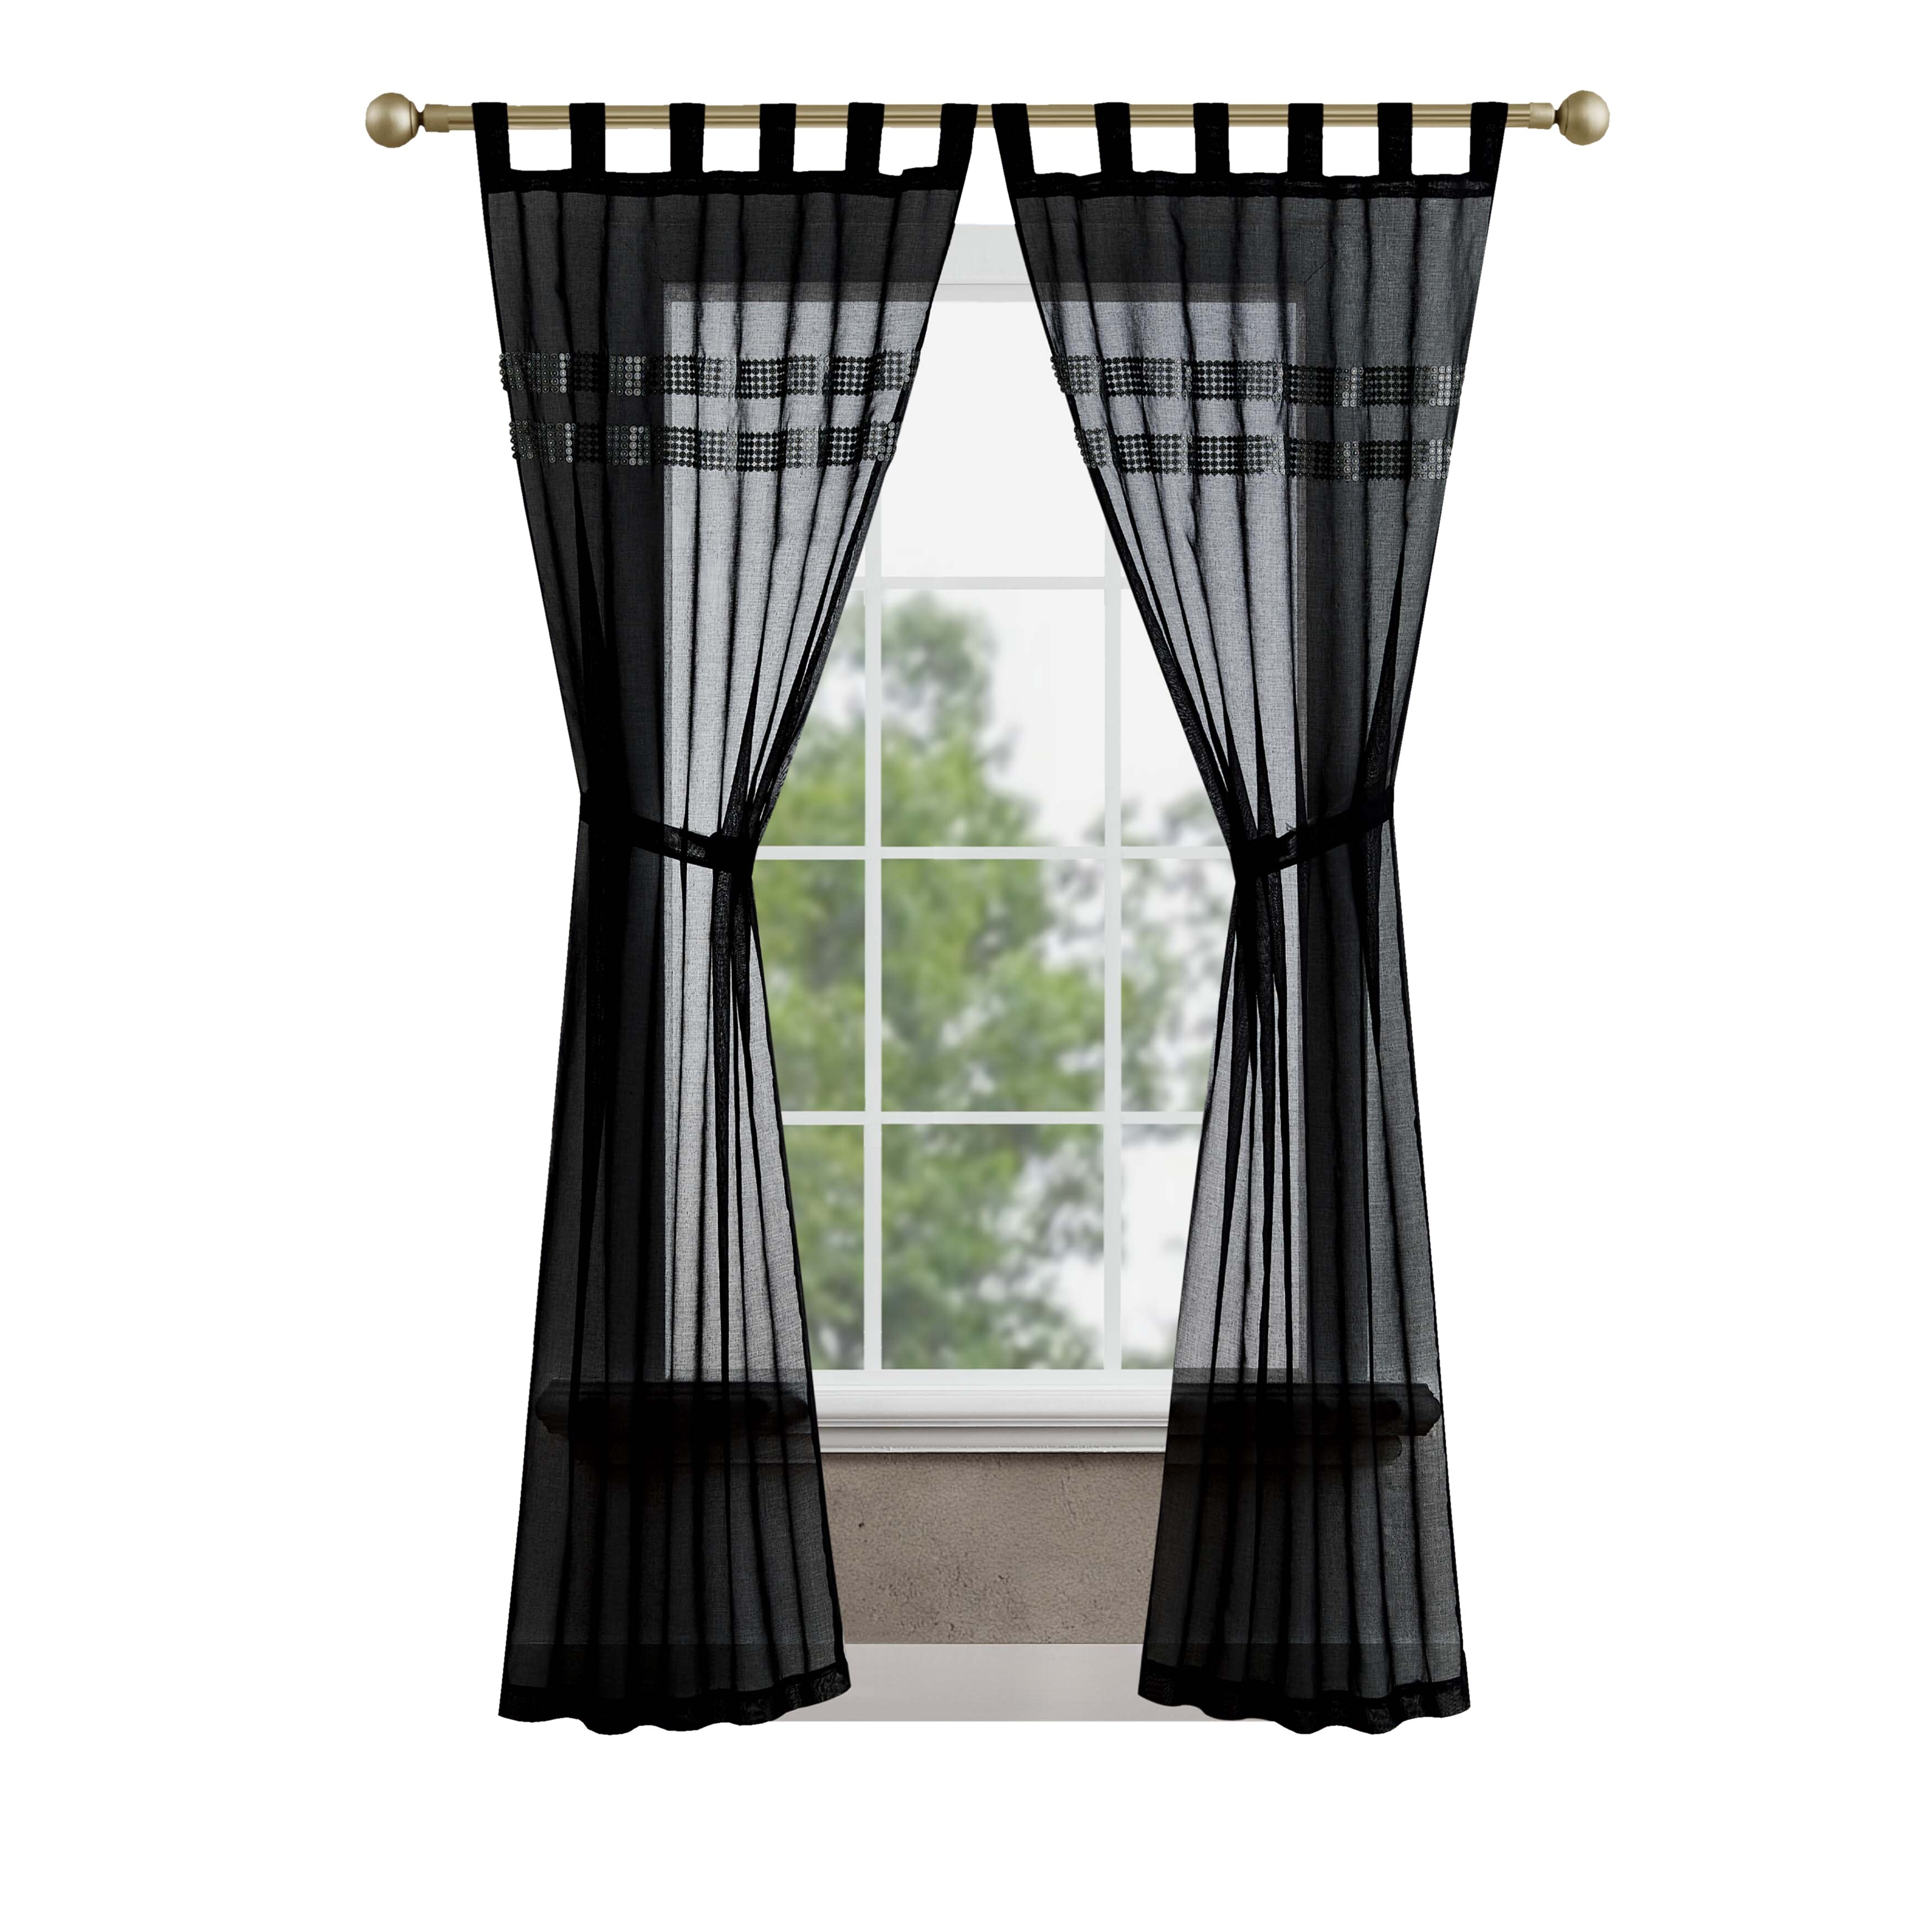 Jessica Simpson Milly Bling Sheer Faux Linen Tab Top Window Curtain Panel  Pair with Tiebacks - On Sale - Bed Bath & Beyond - 35383743